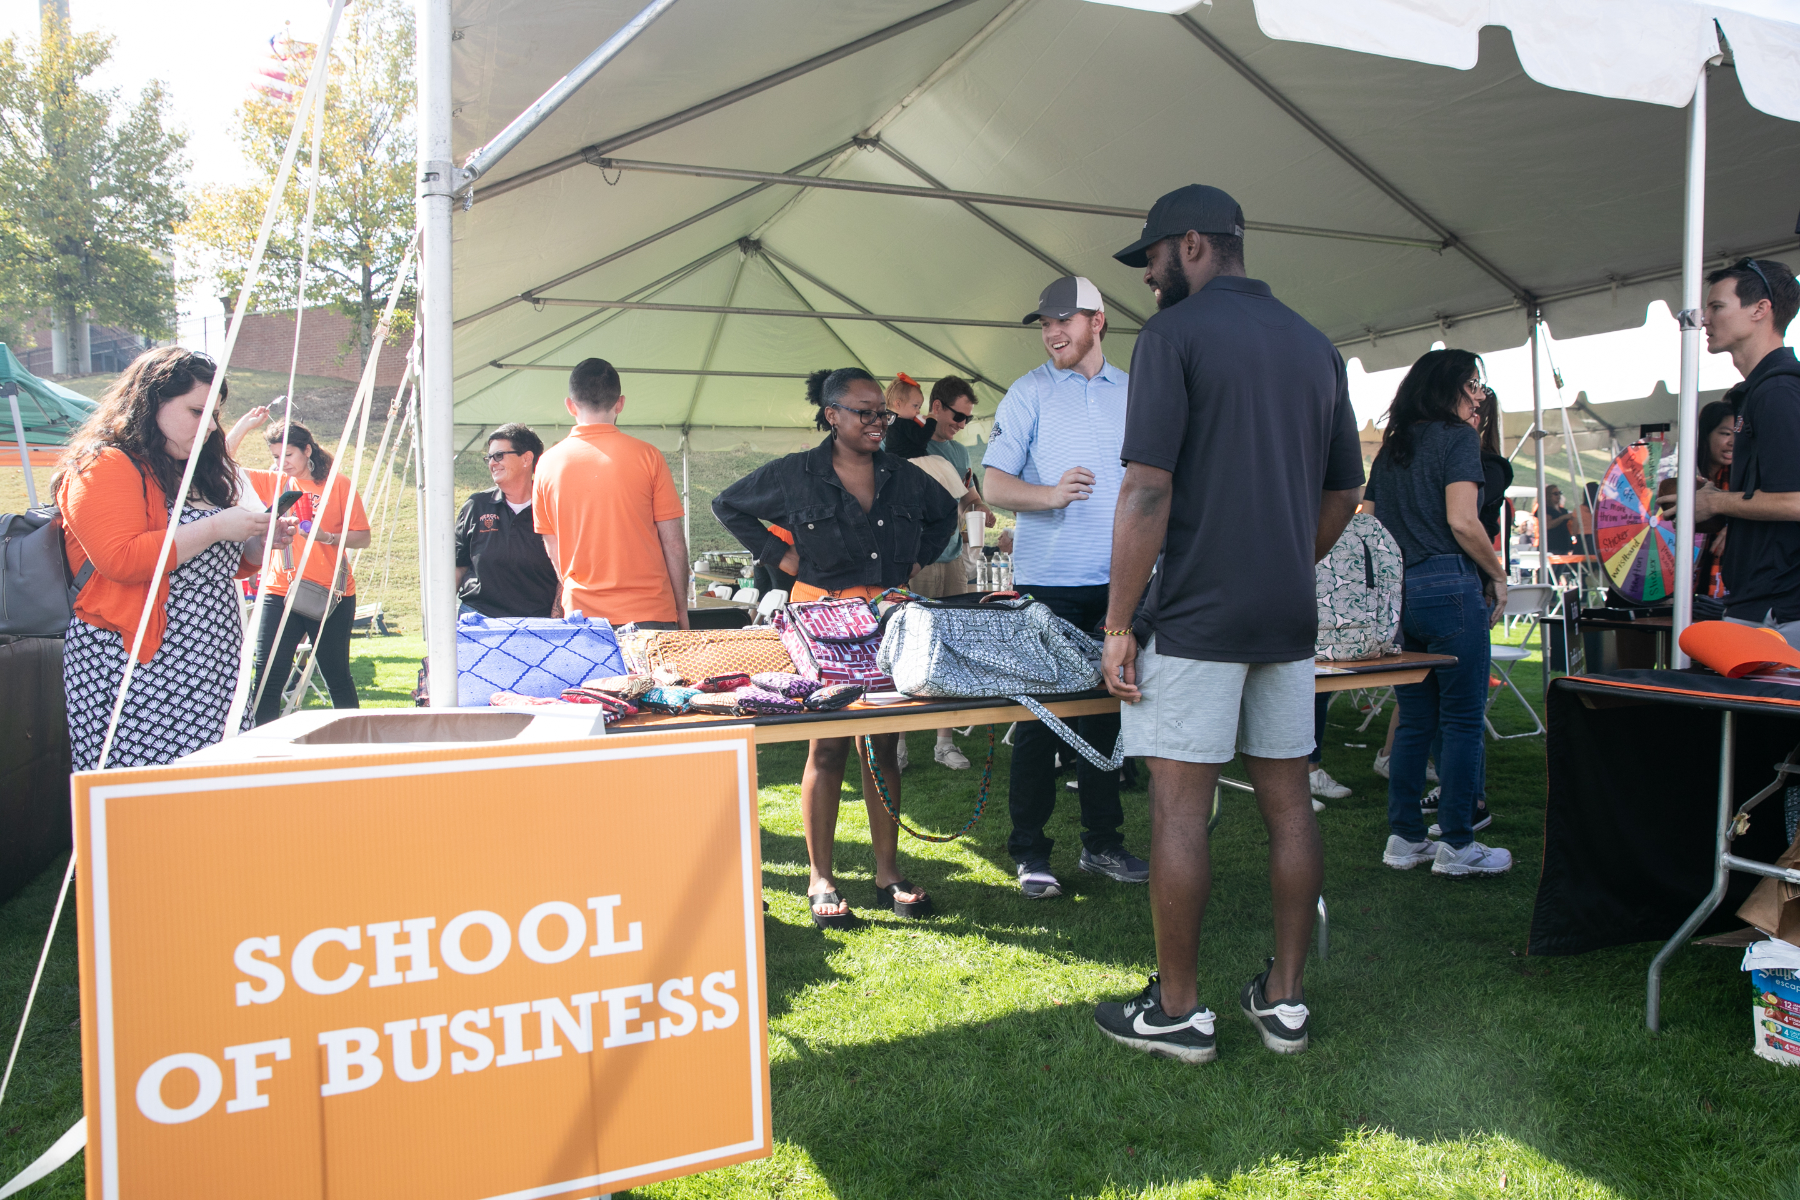 A sign at a tailgating tent says School of Business